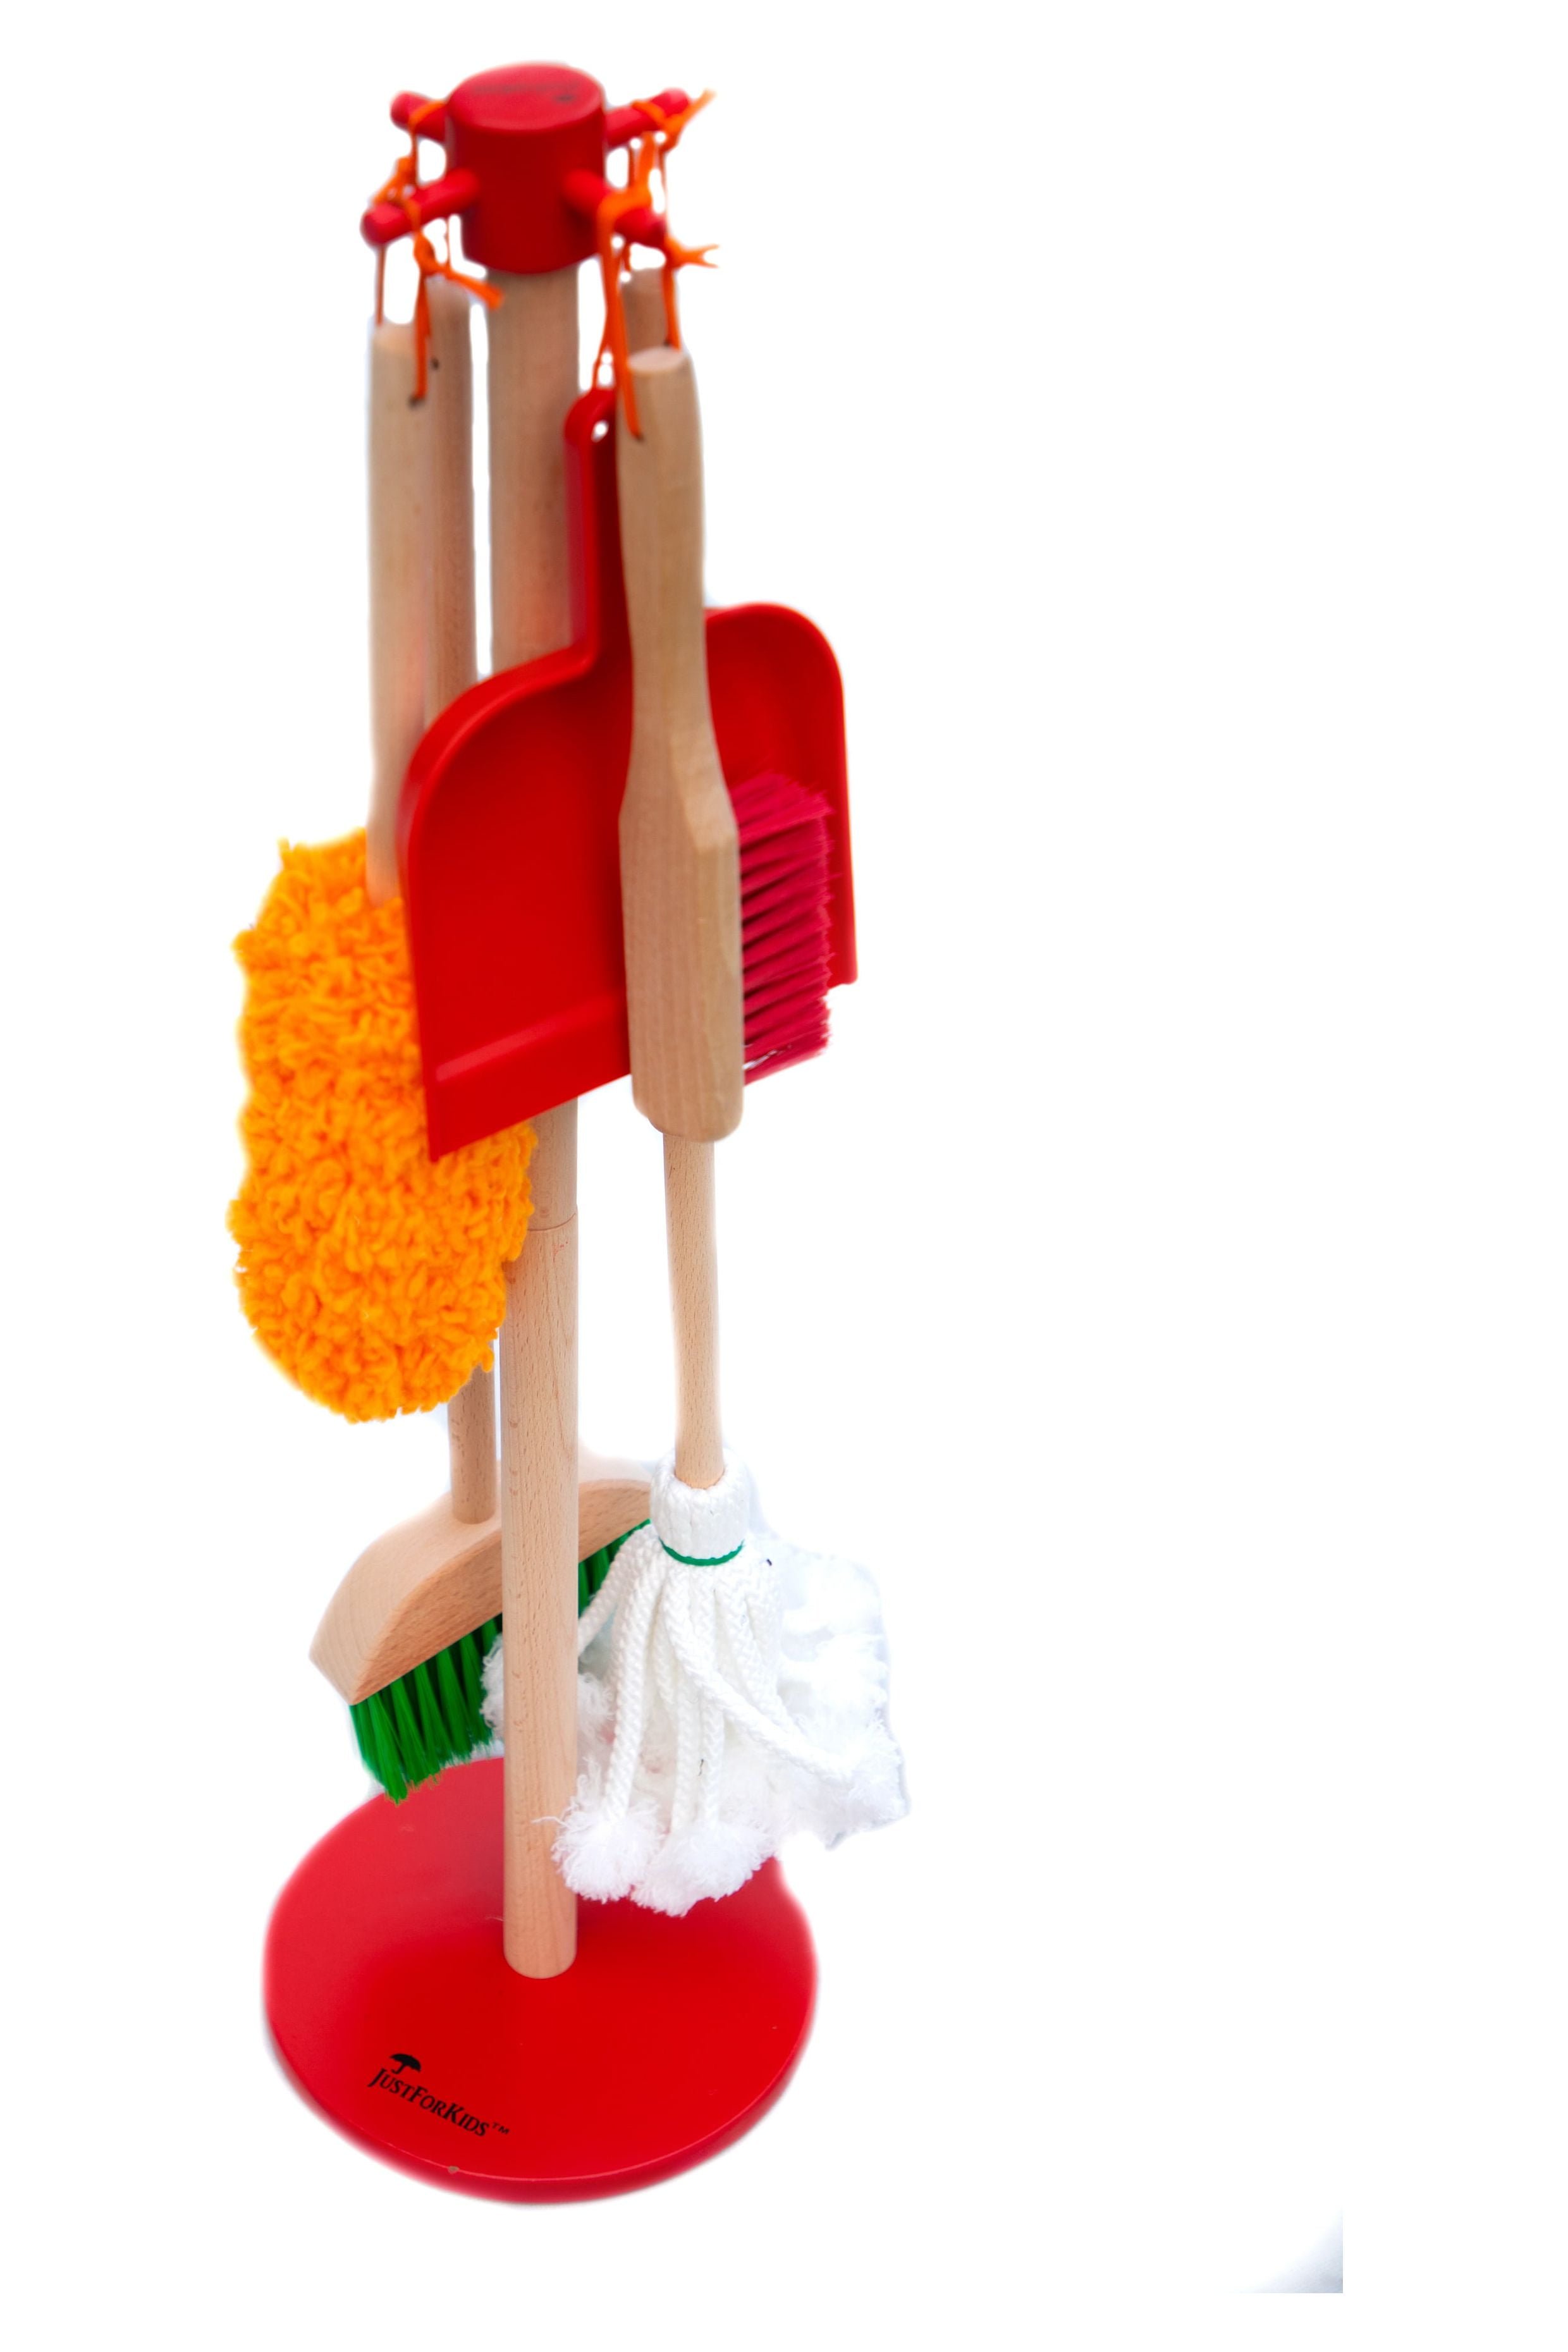 Cleaning Set – PlanToys USA